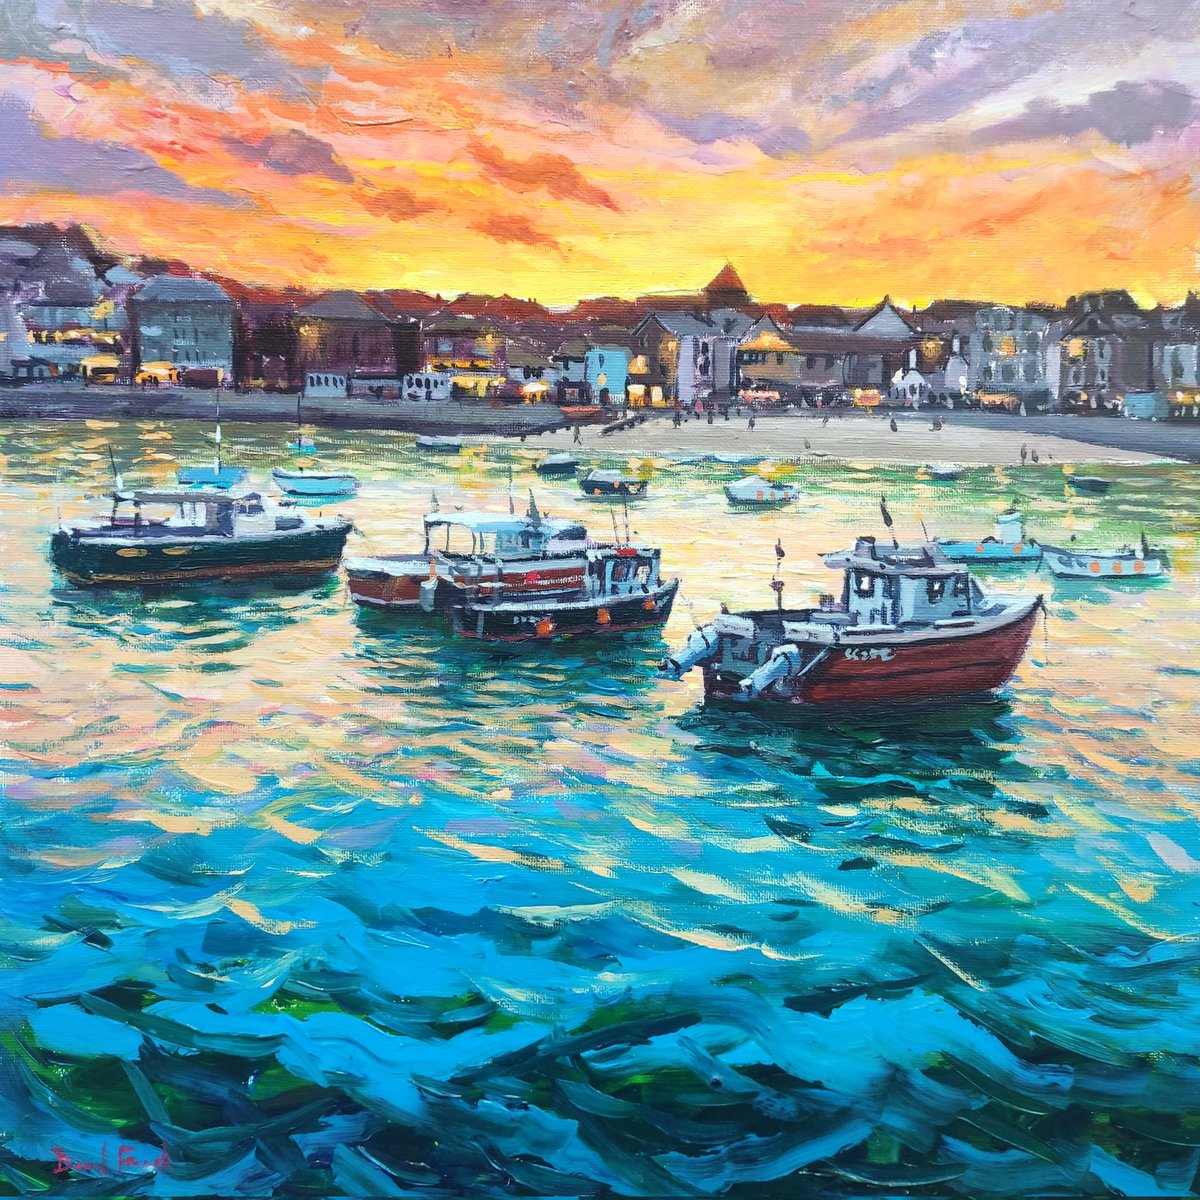 Paintings of St Ives Harbour and beaches....sunrise to sunset

At the Arthouse Gallery Island Road TR261NT

thearthouses.com